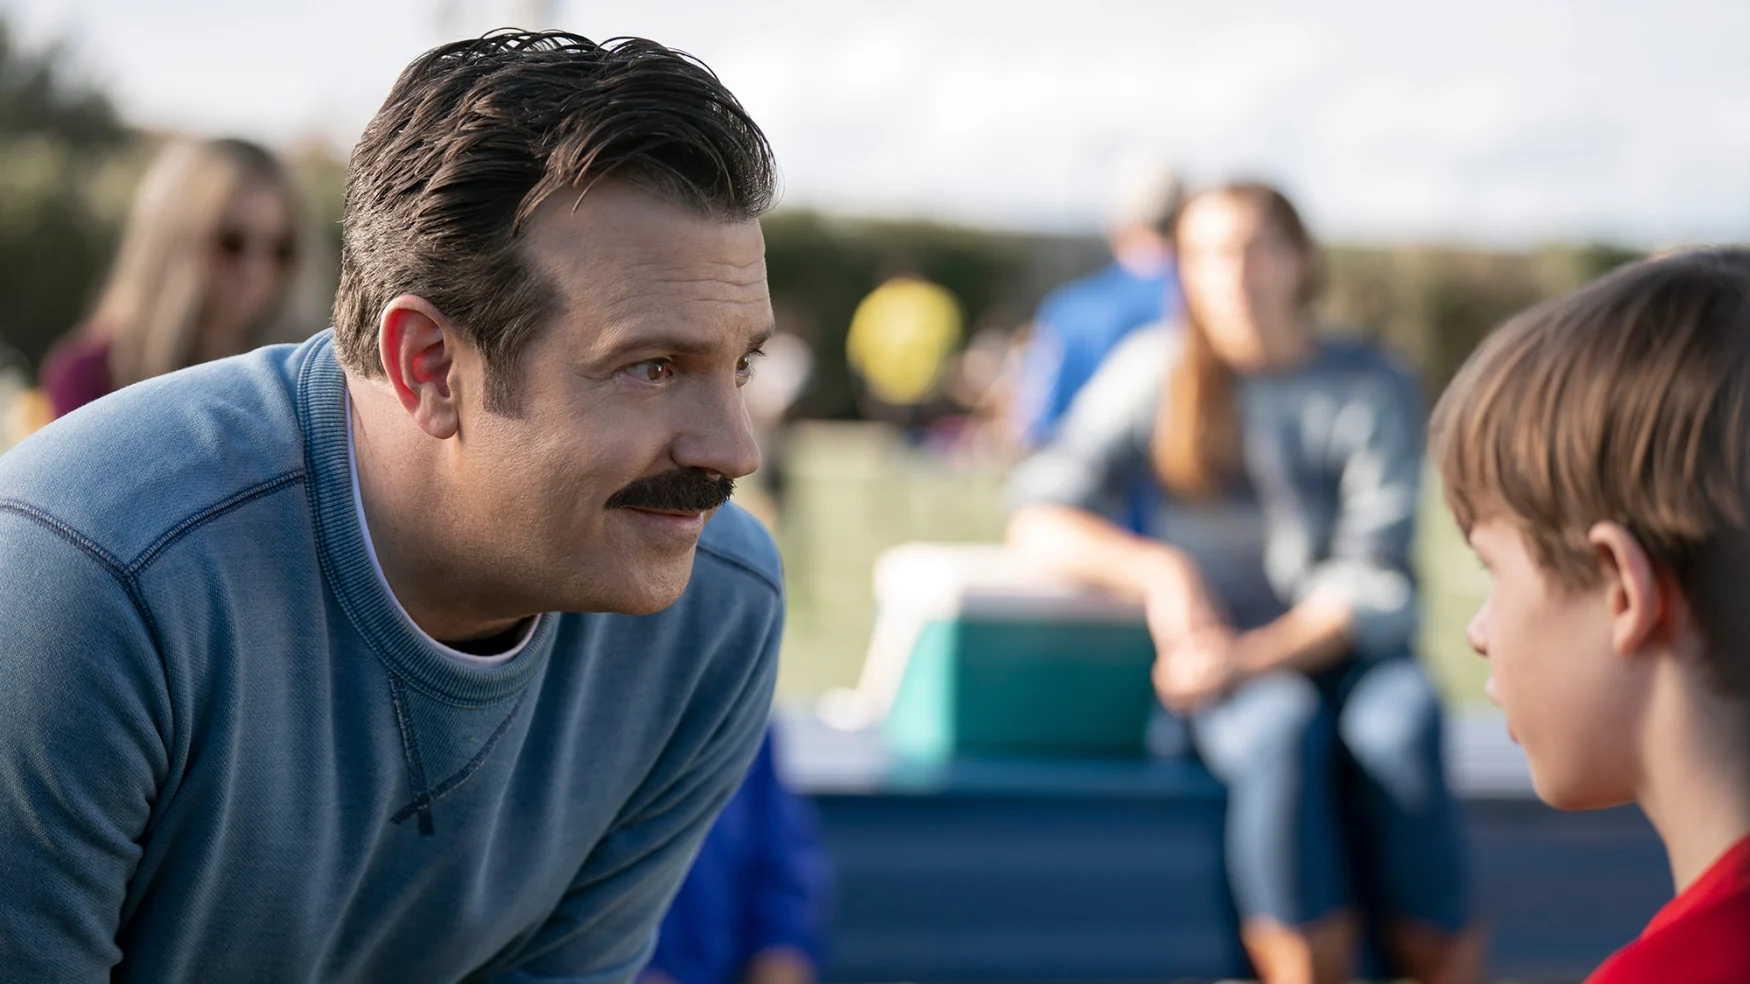 Jason Sudeikis as ‘Ted Lasso.’ He’s on a soccer field, leaning down and talking to a young boy.